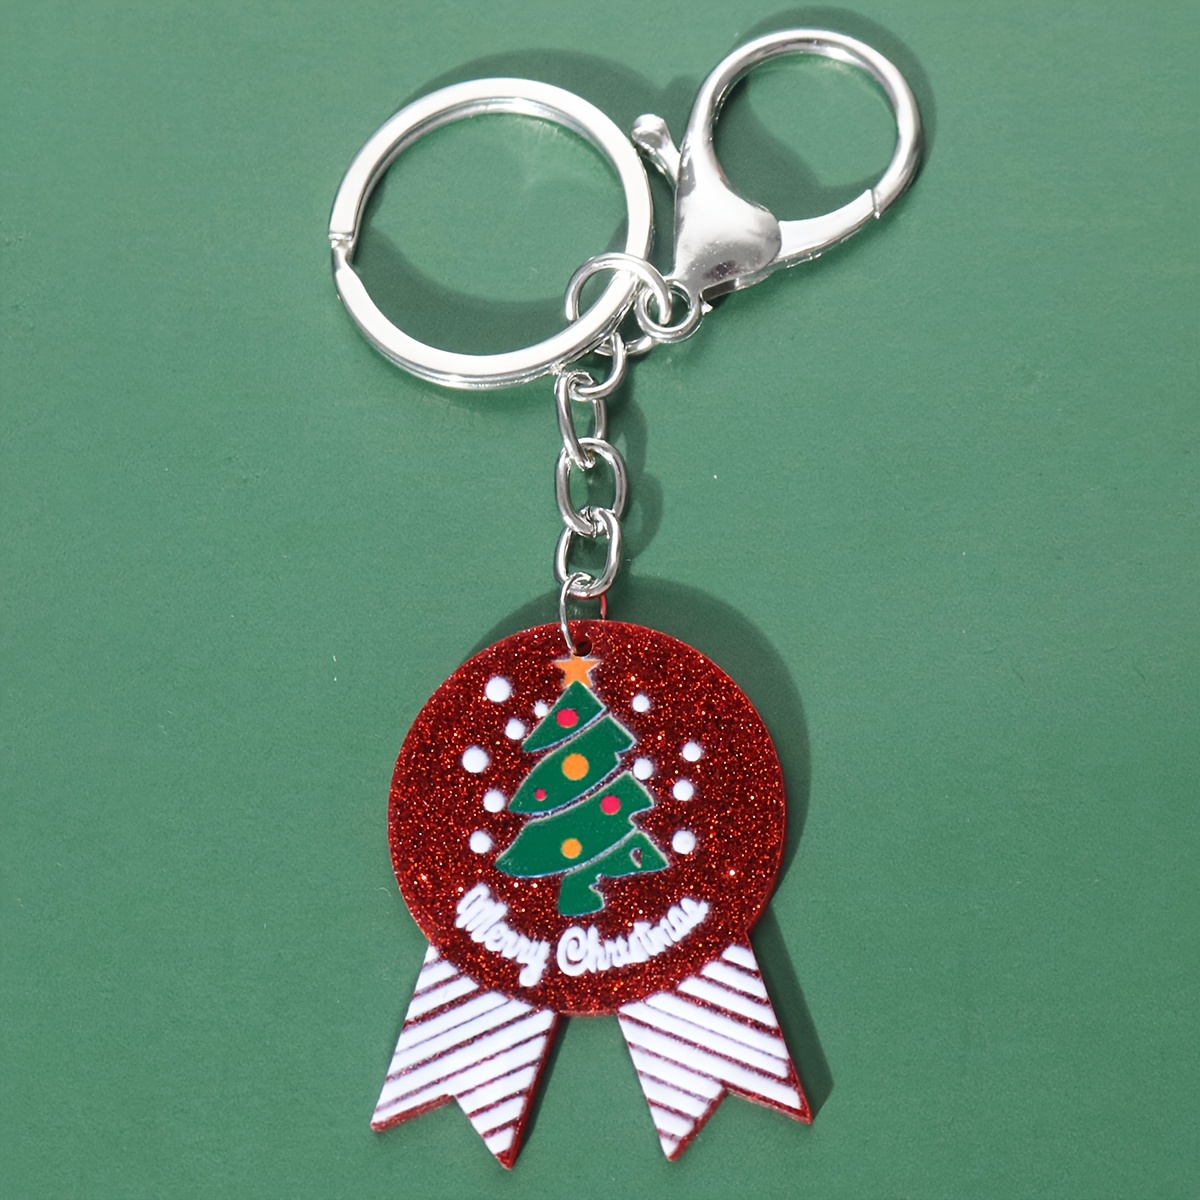 1pc Vintage Silver Alloy Christmas Tree Decoration Pendant With Santa Claus  Keychain And Christmas Decorative Accessories